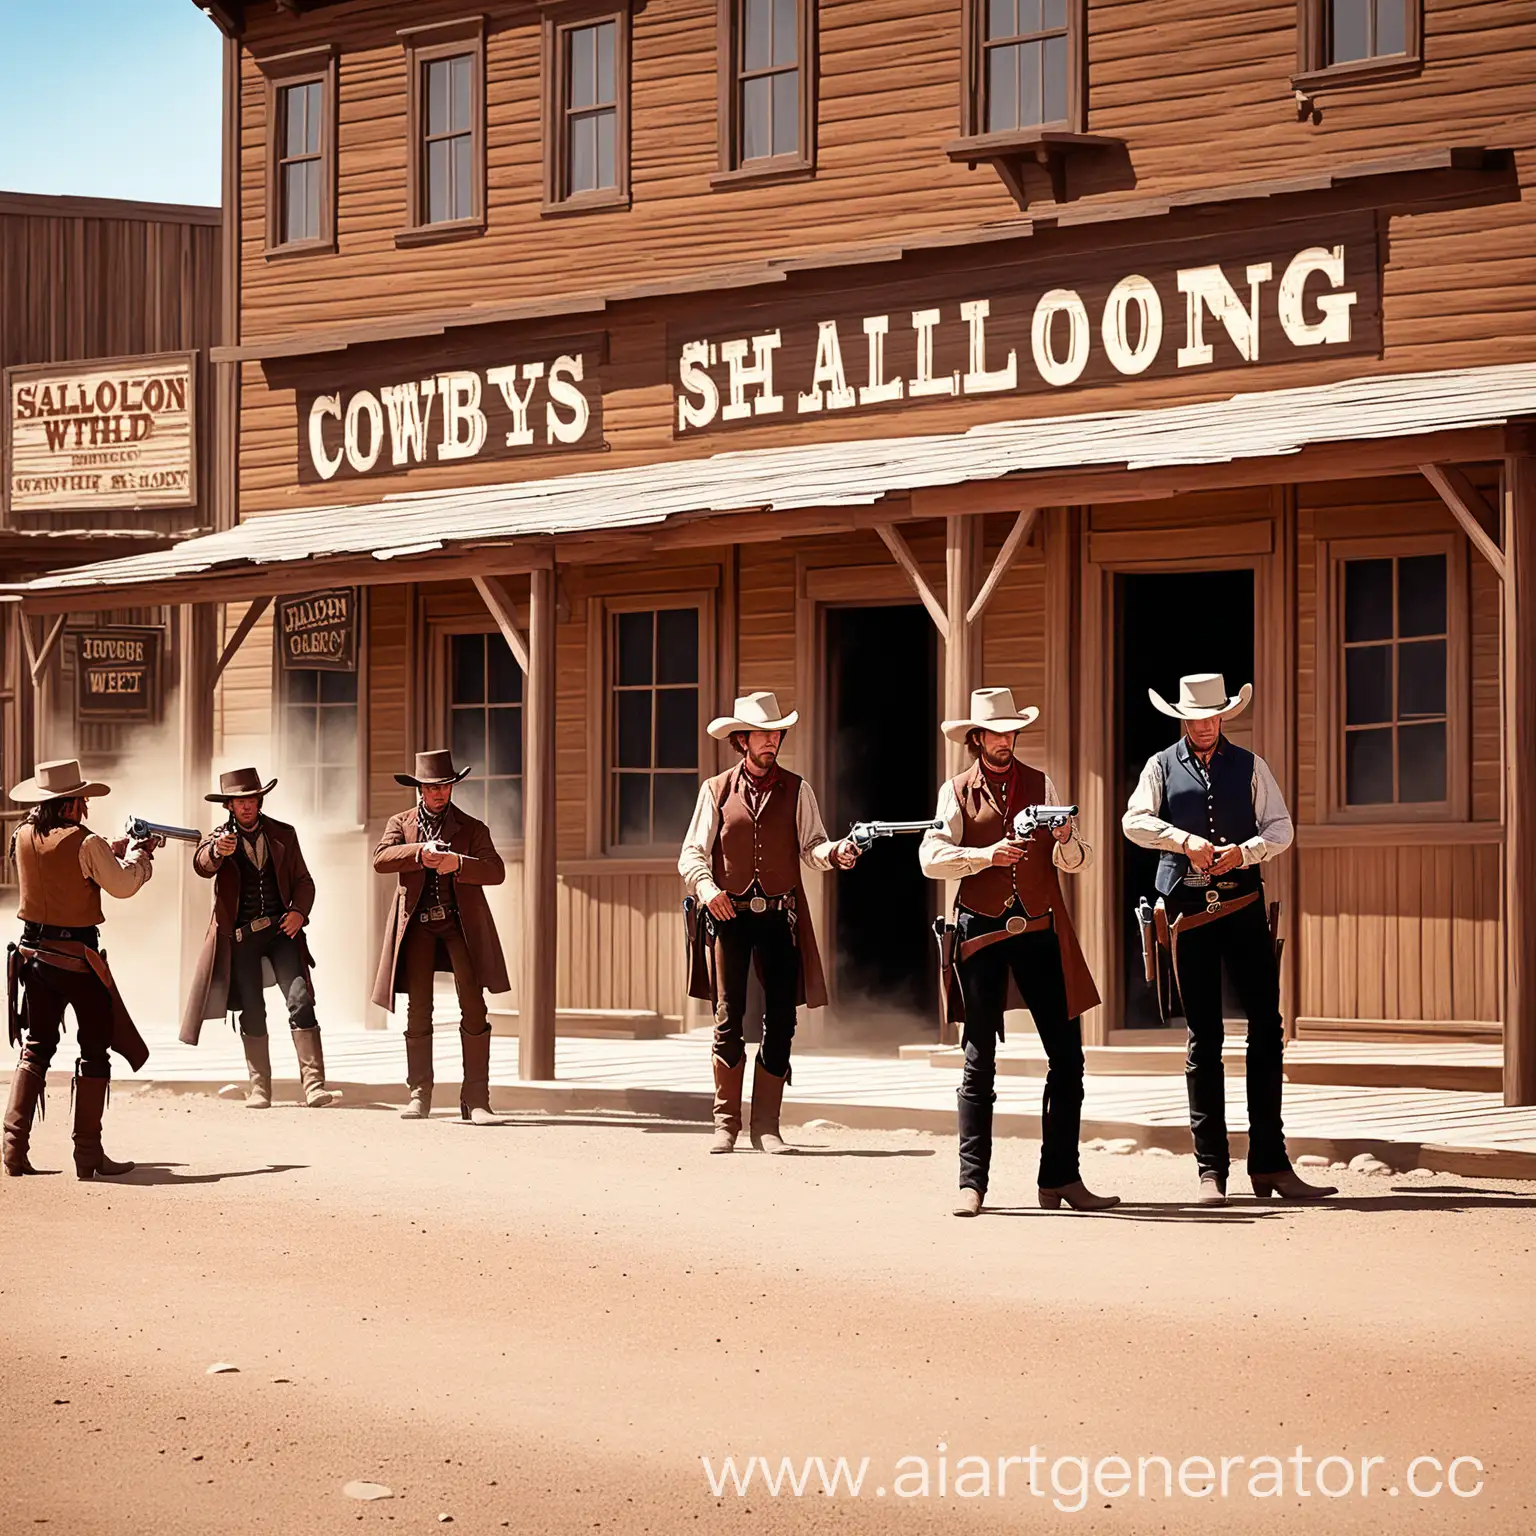 Cowboys shooting with revolvers on the street near a saloon in the Wild West